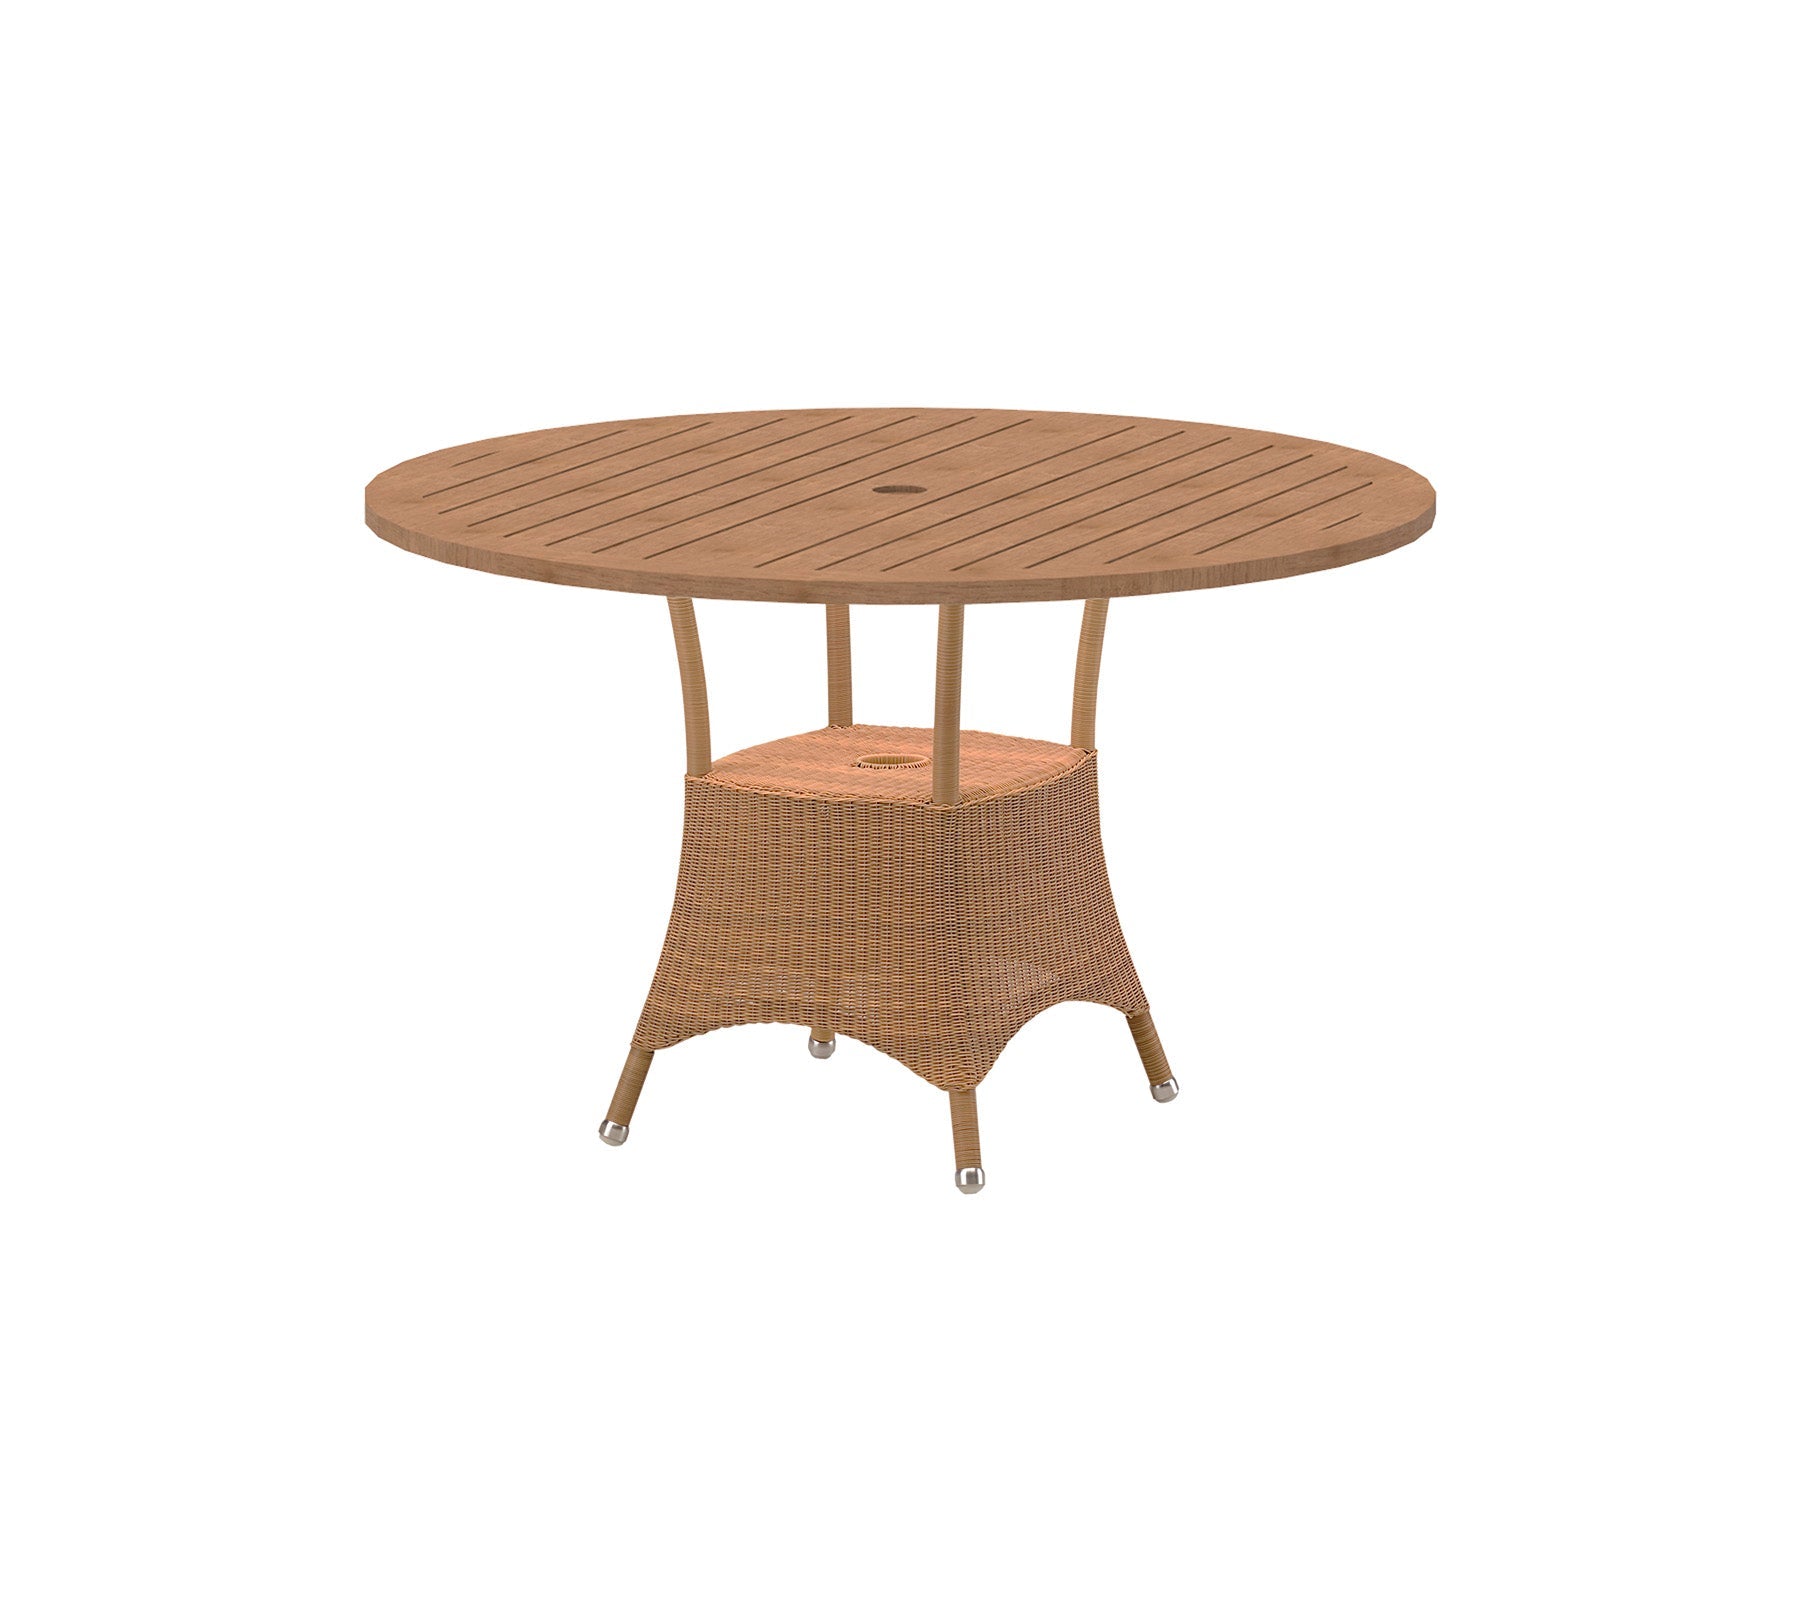 Cane-line Lansing Dining Table, Small, Dia. 120 Cm 5098LT